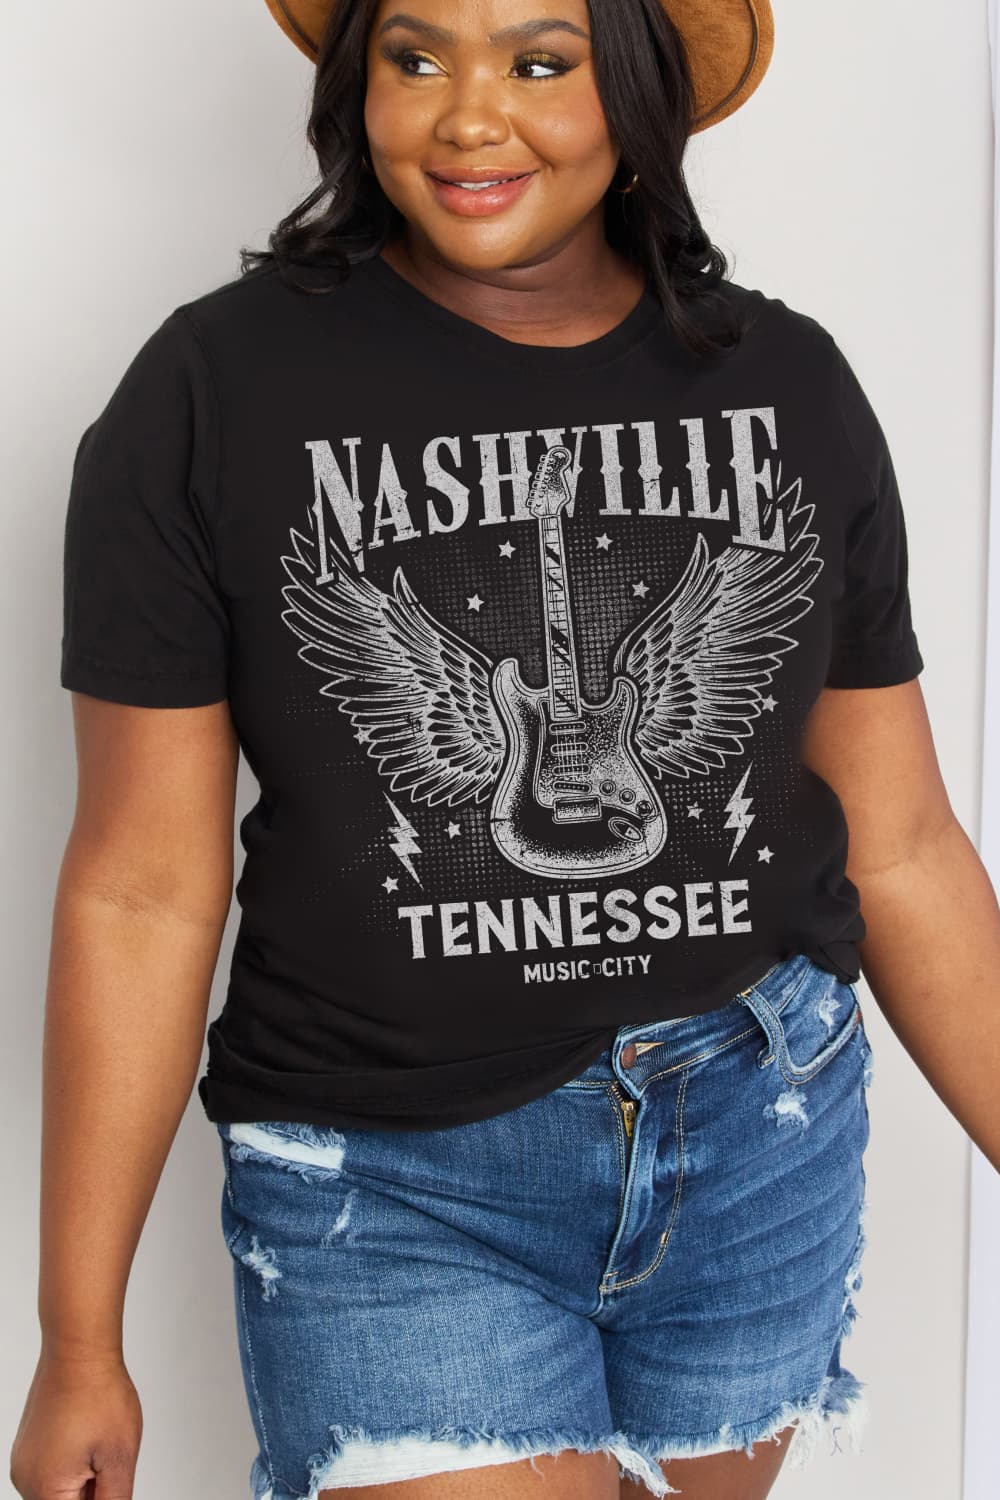 Simply Love NASHVILLE TENNESSEE MUSIC CITY Graphic Cotton Tee